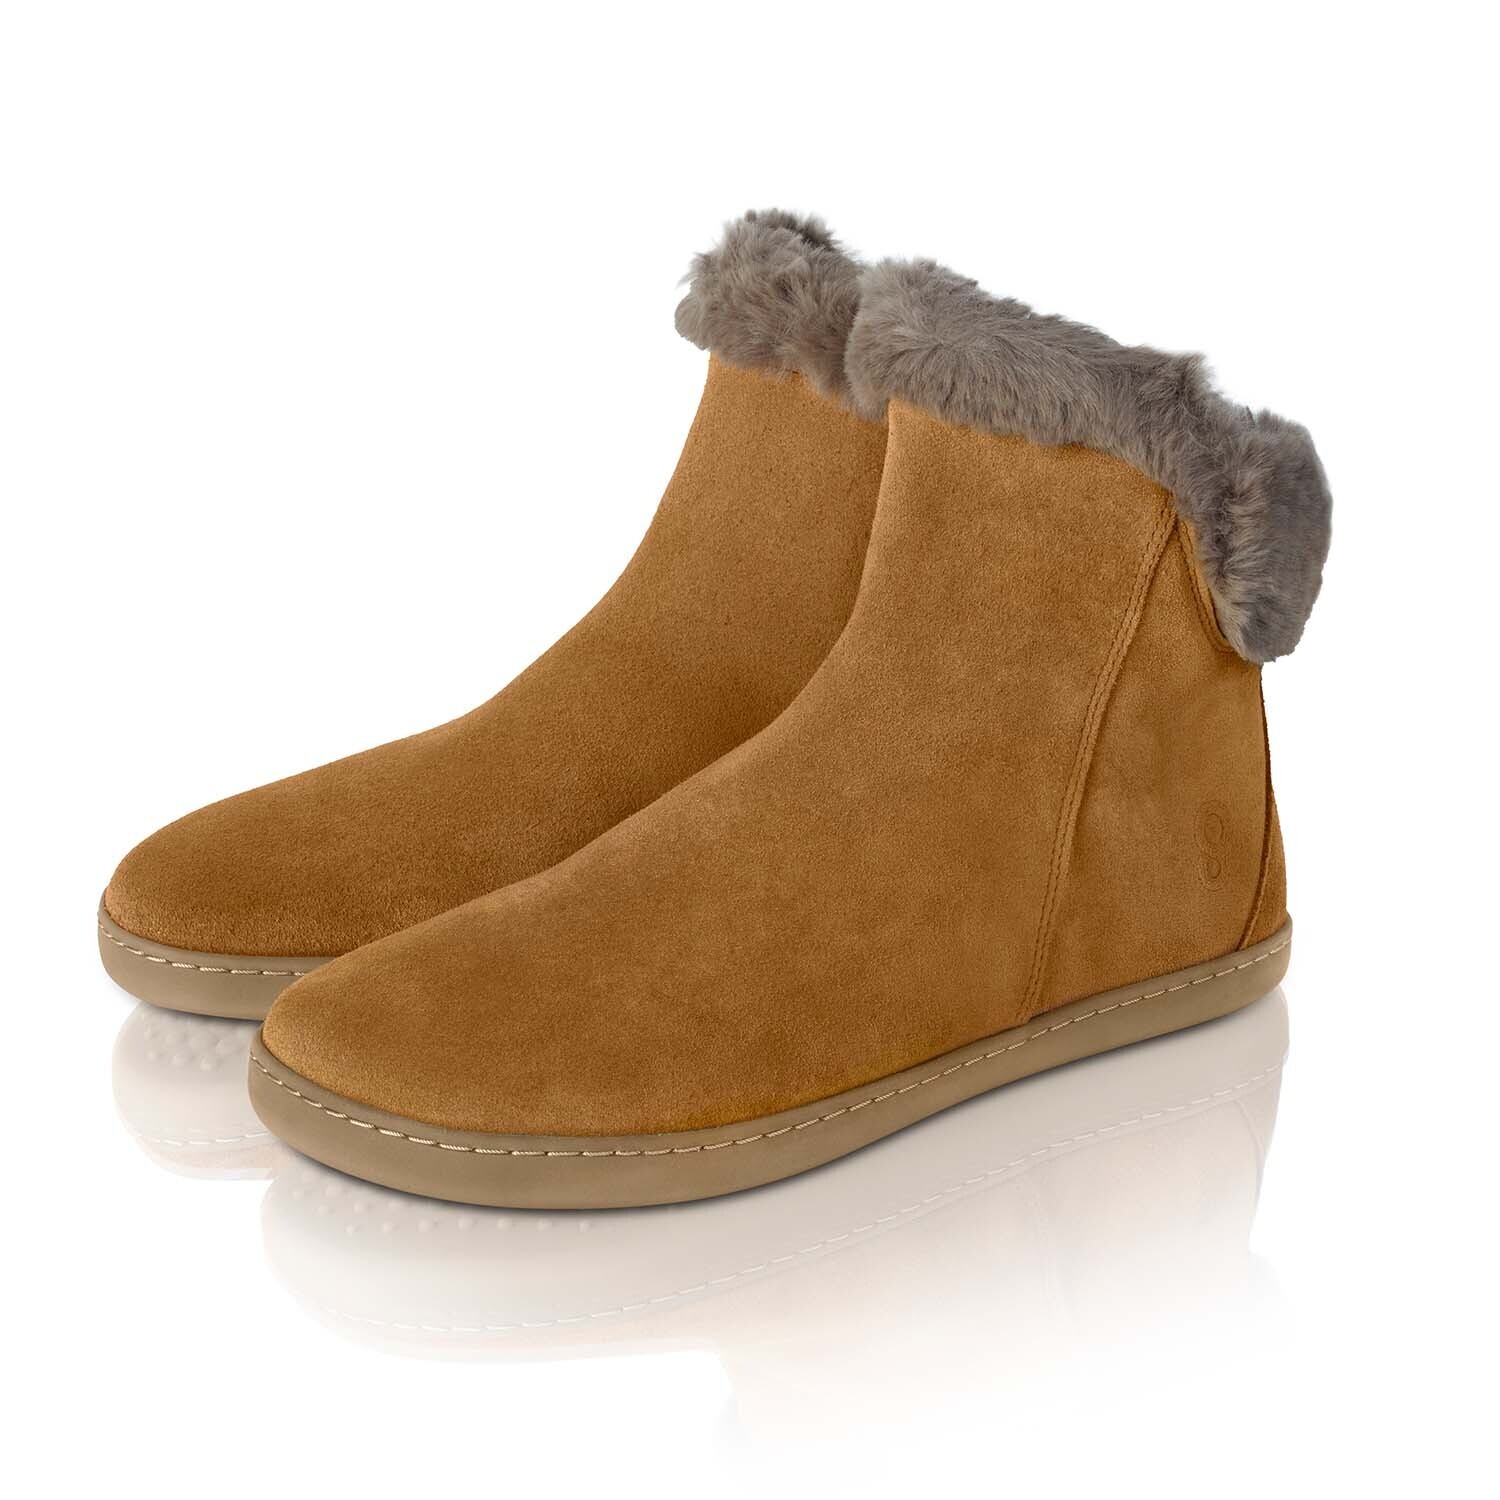 SHAPEN FLUFFY BROWN WARM LINED BAREFOOT BOOTS